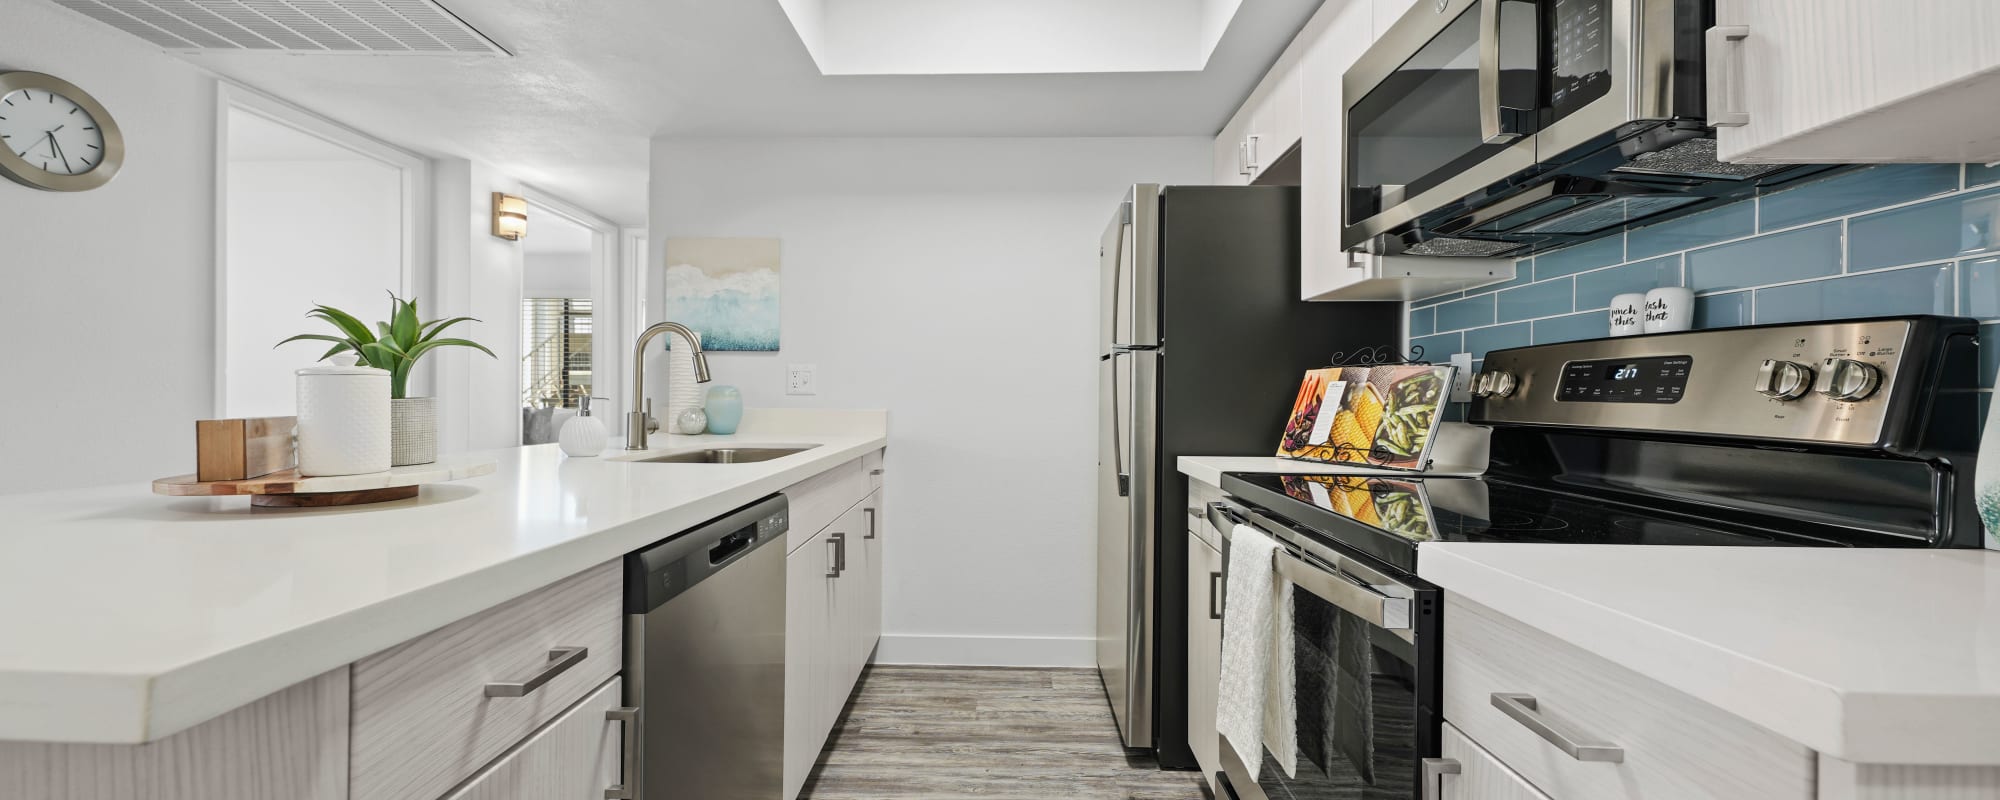 Stainless-steel appliances in a modern kitchen at Park at 33rd in Phoenix, Arizona